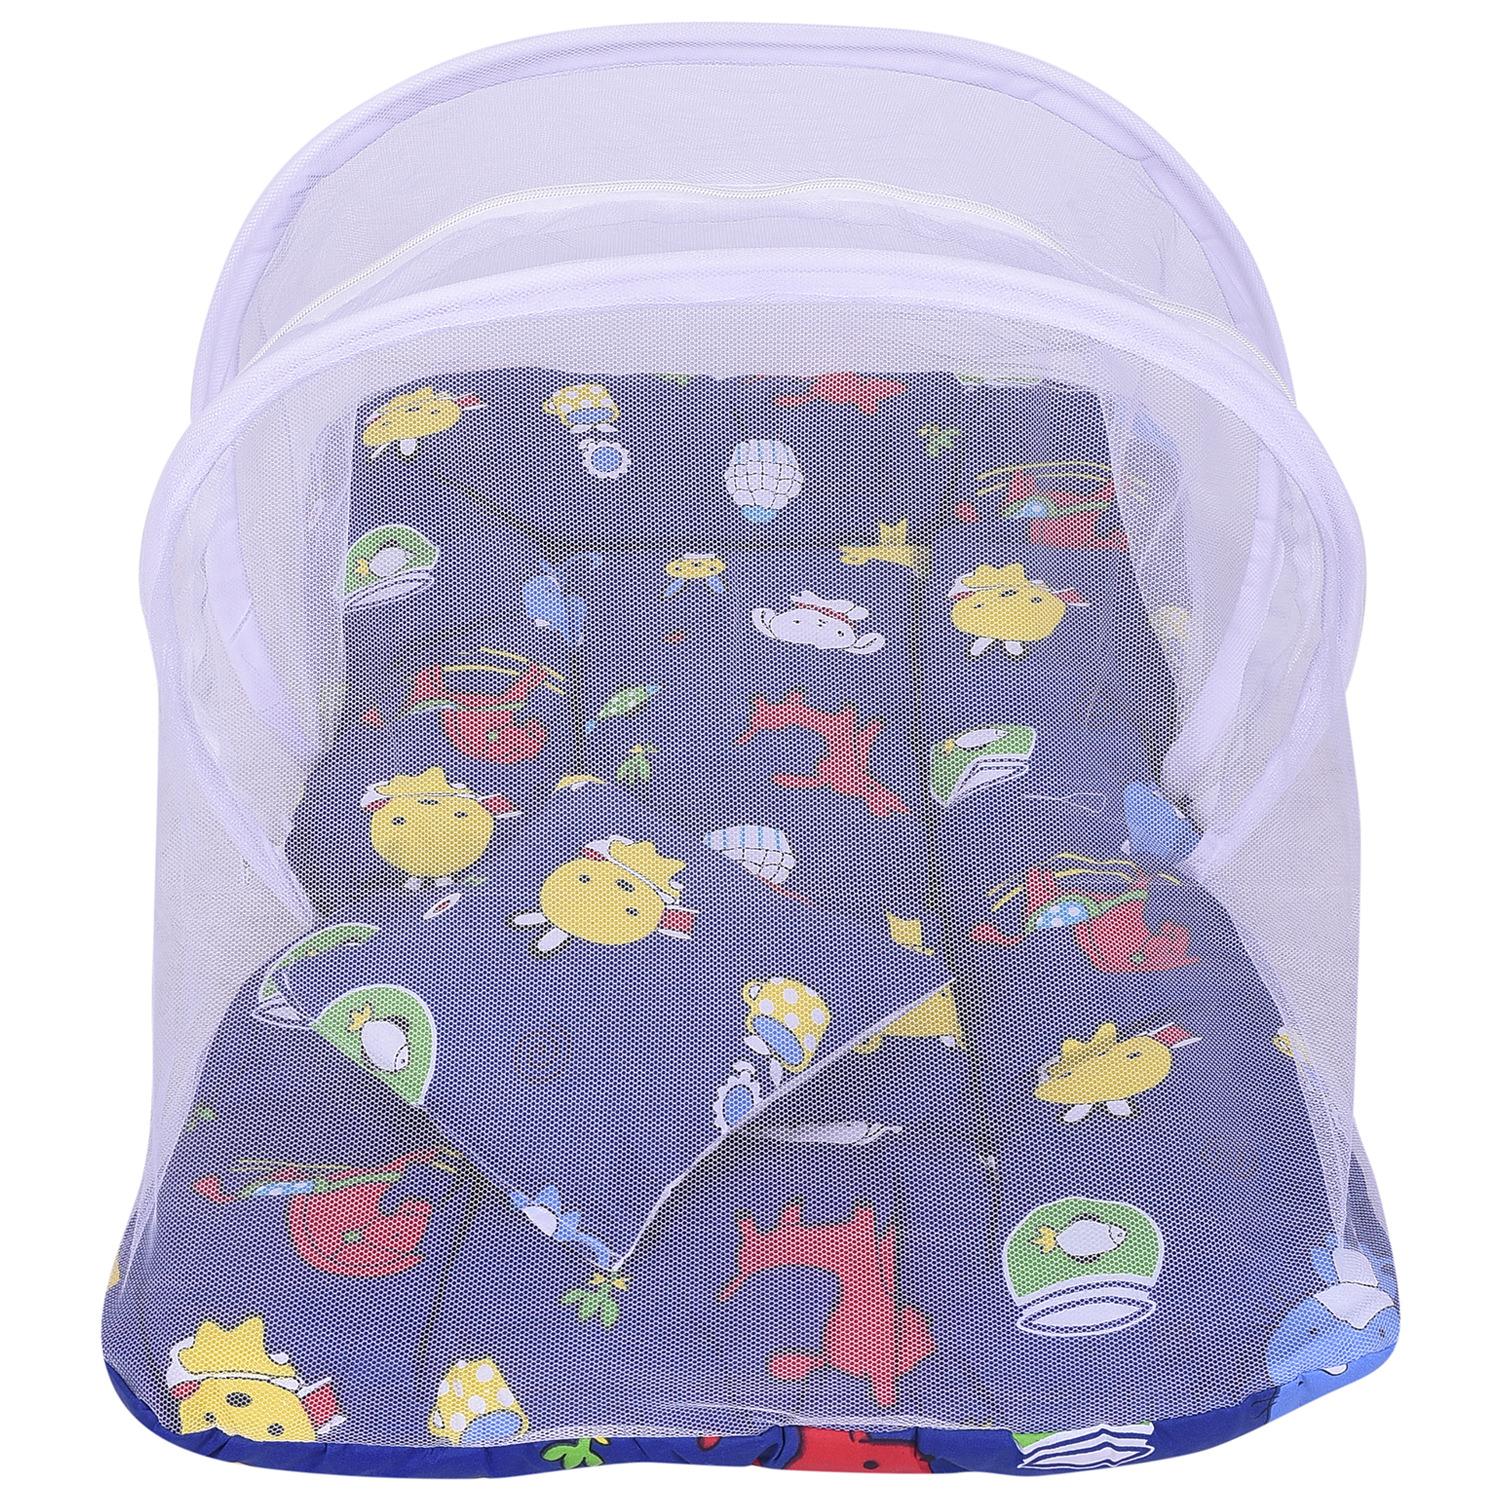 Baby Cotton Mosquito Foldable Net Bedding- 0-6 Months- Multicolored Blue